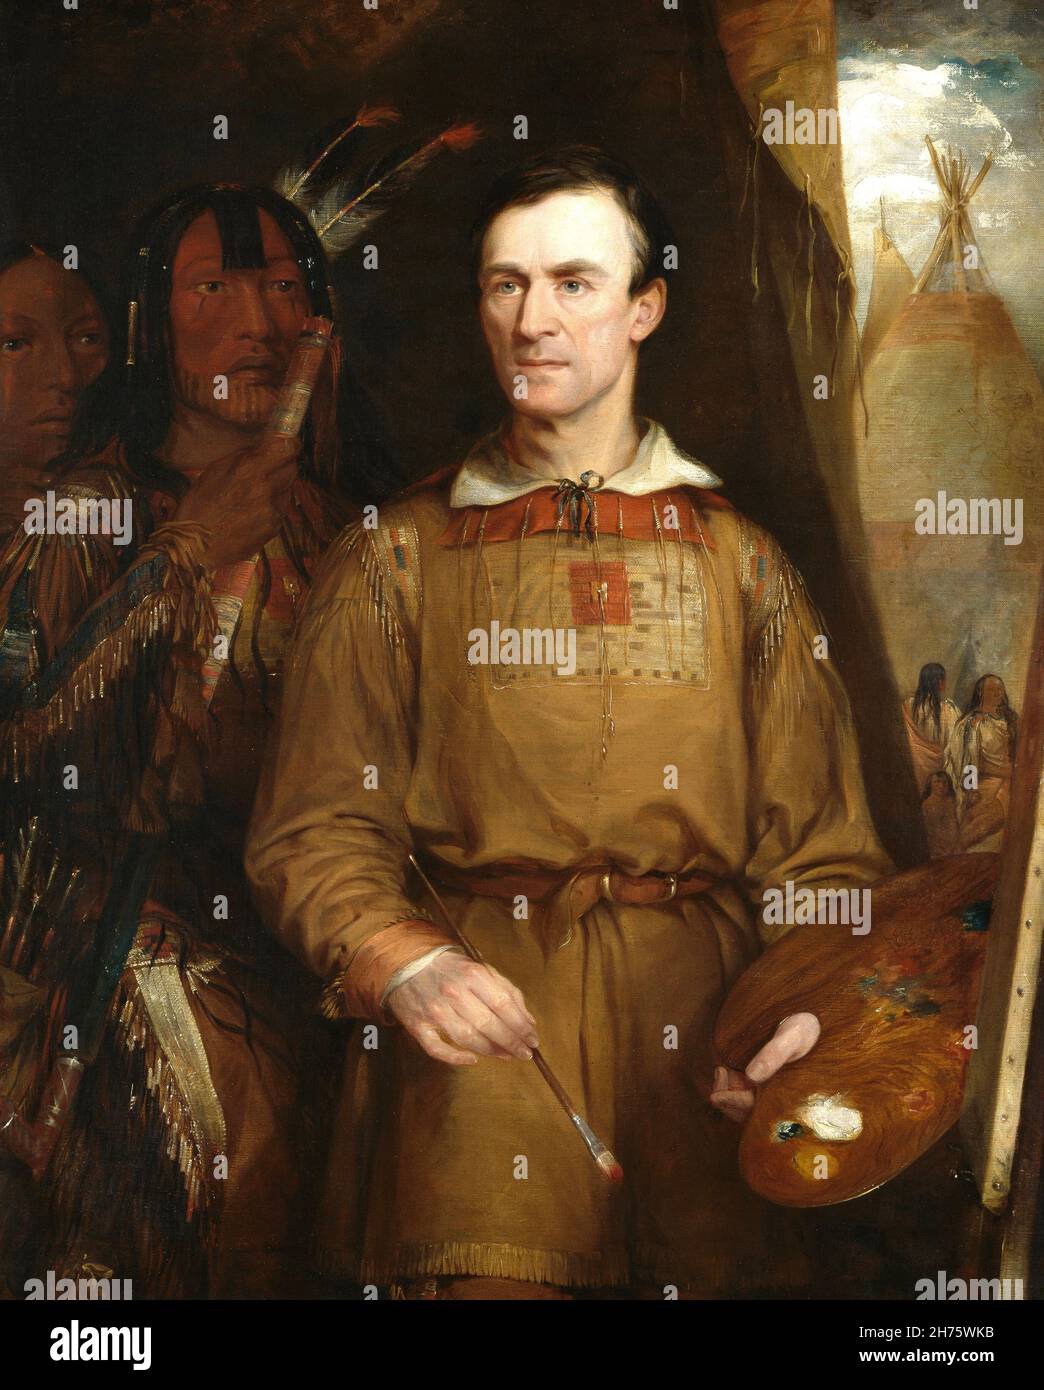 William Fisk painting of painter George Catlin - 1849. Stock Photo